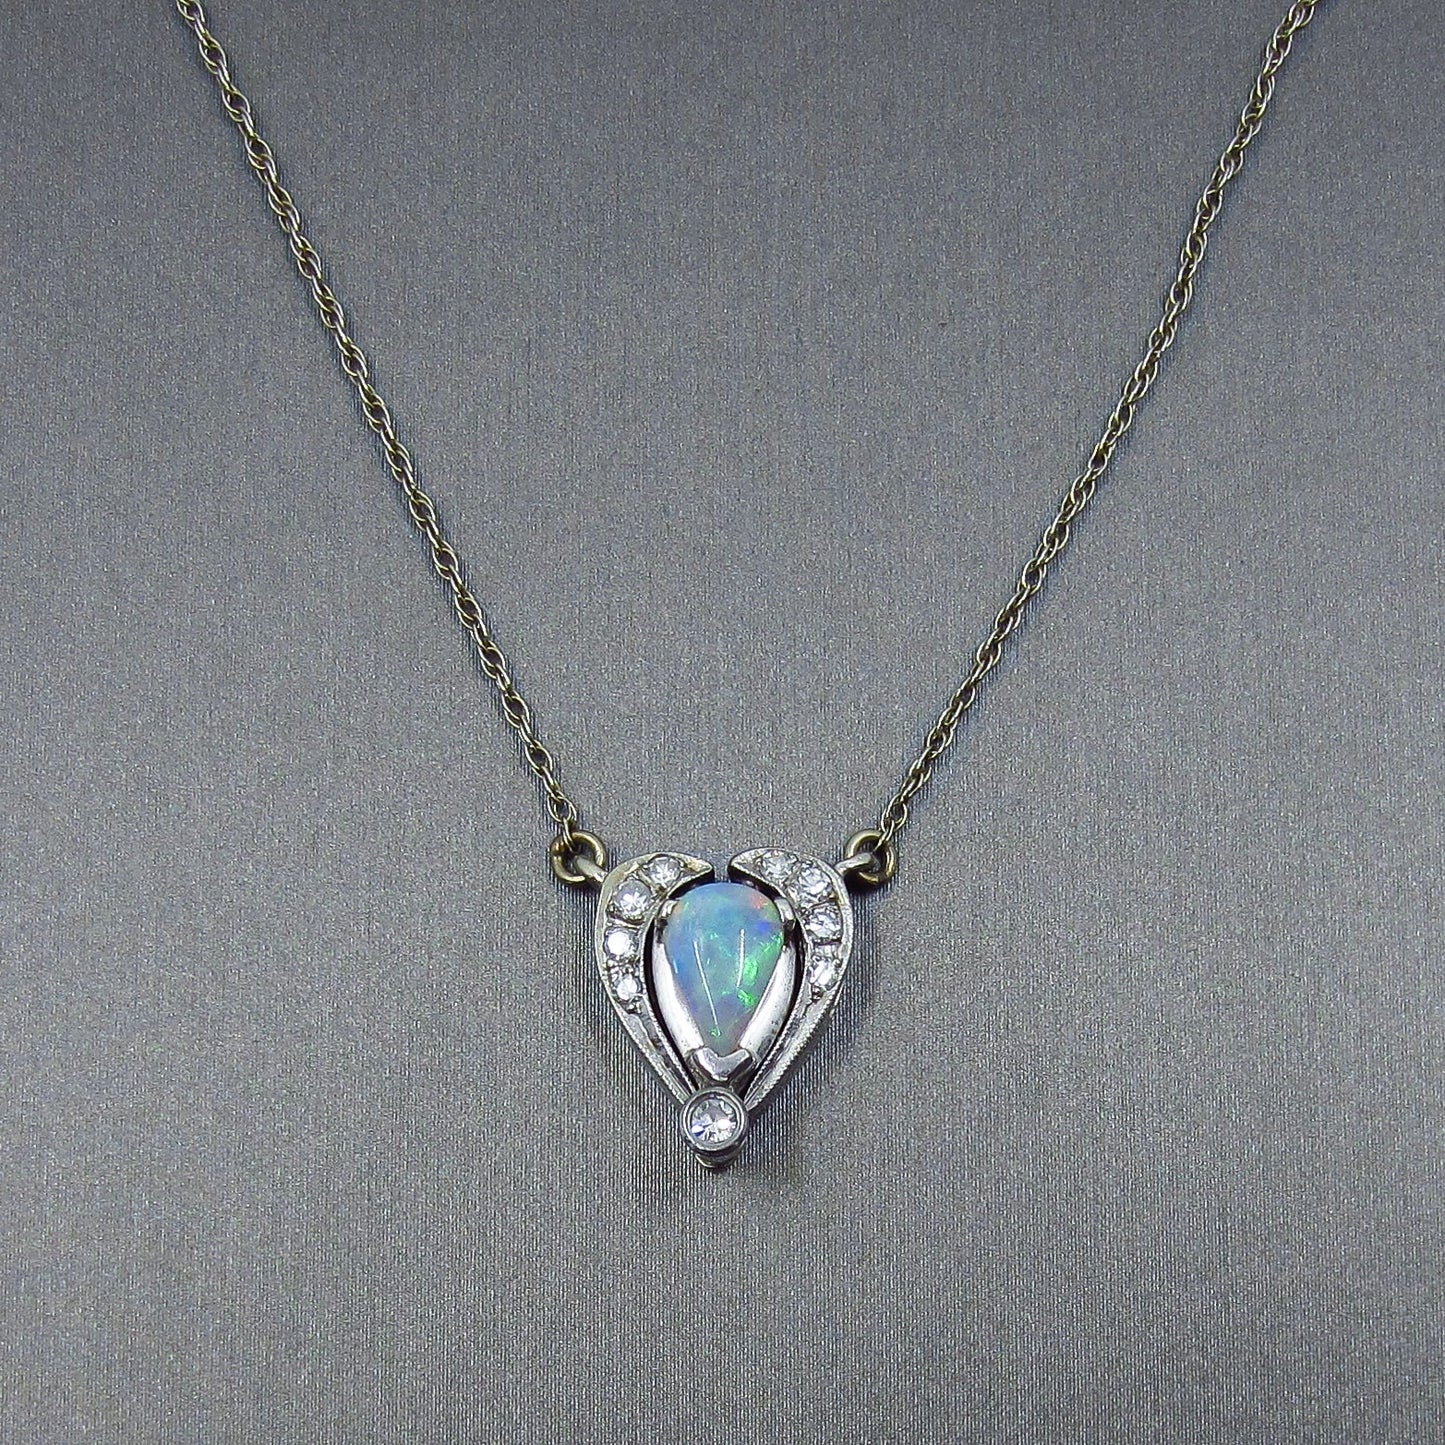 MidCentury Opal and Diamond Convertible Necklace 14k c. 1950